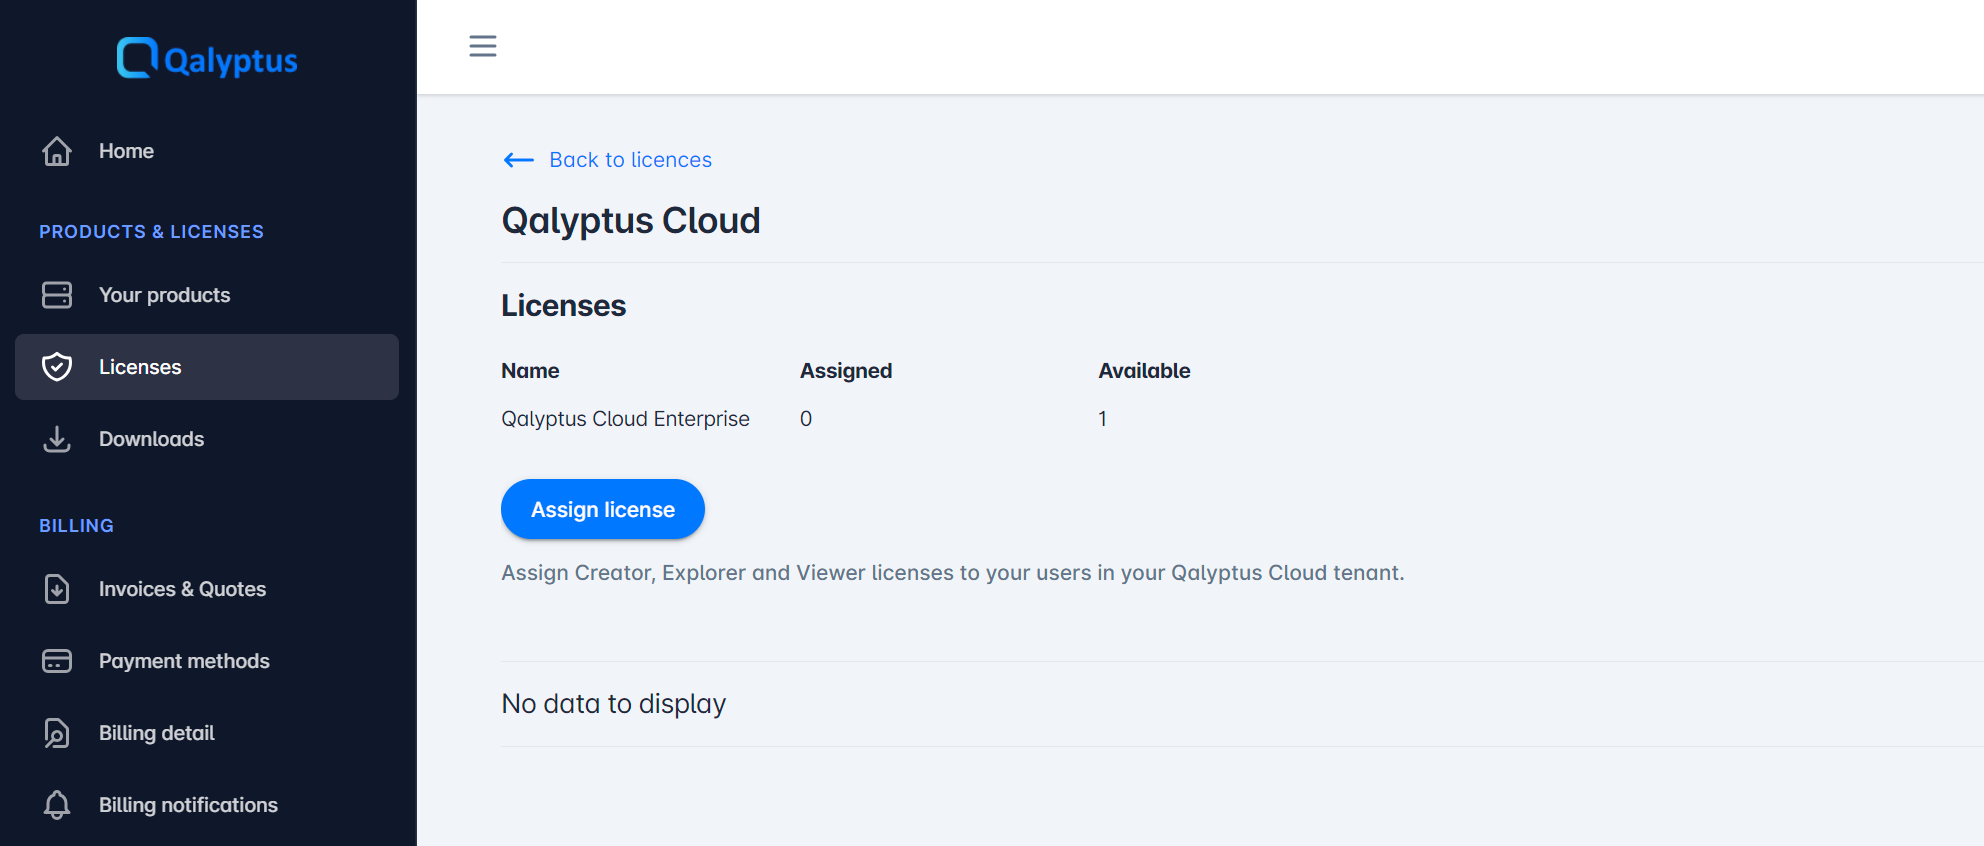 Licenses page in Qalyptus Customer Portal